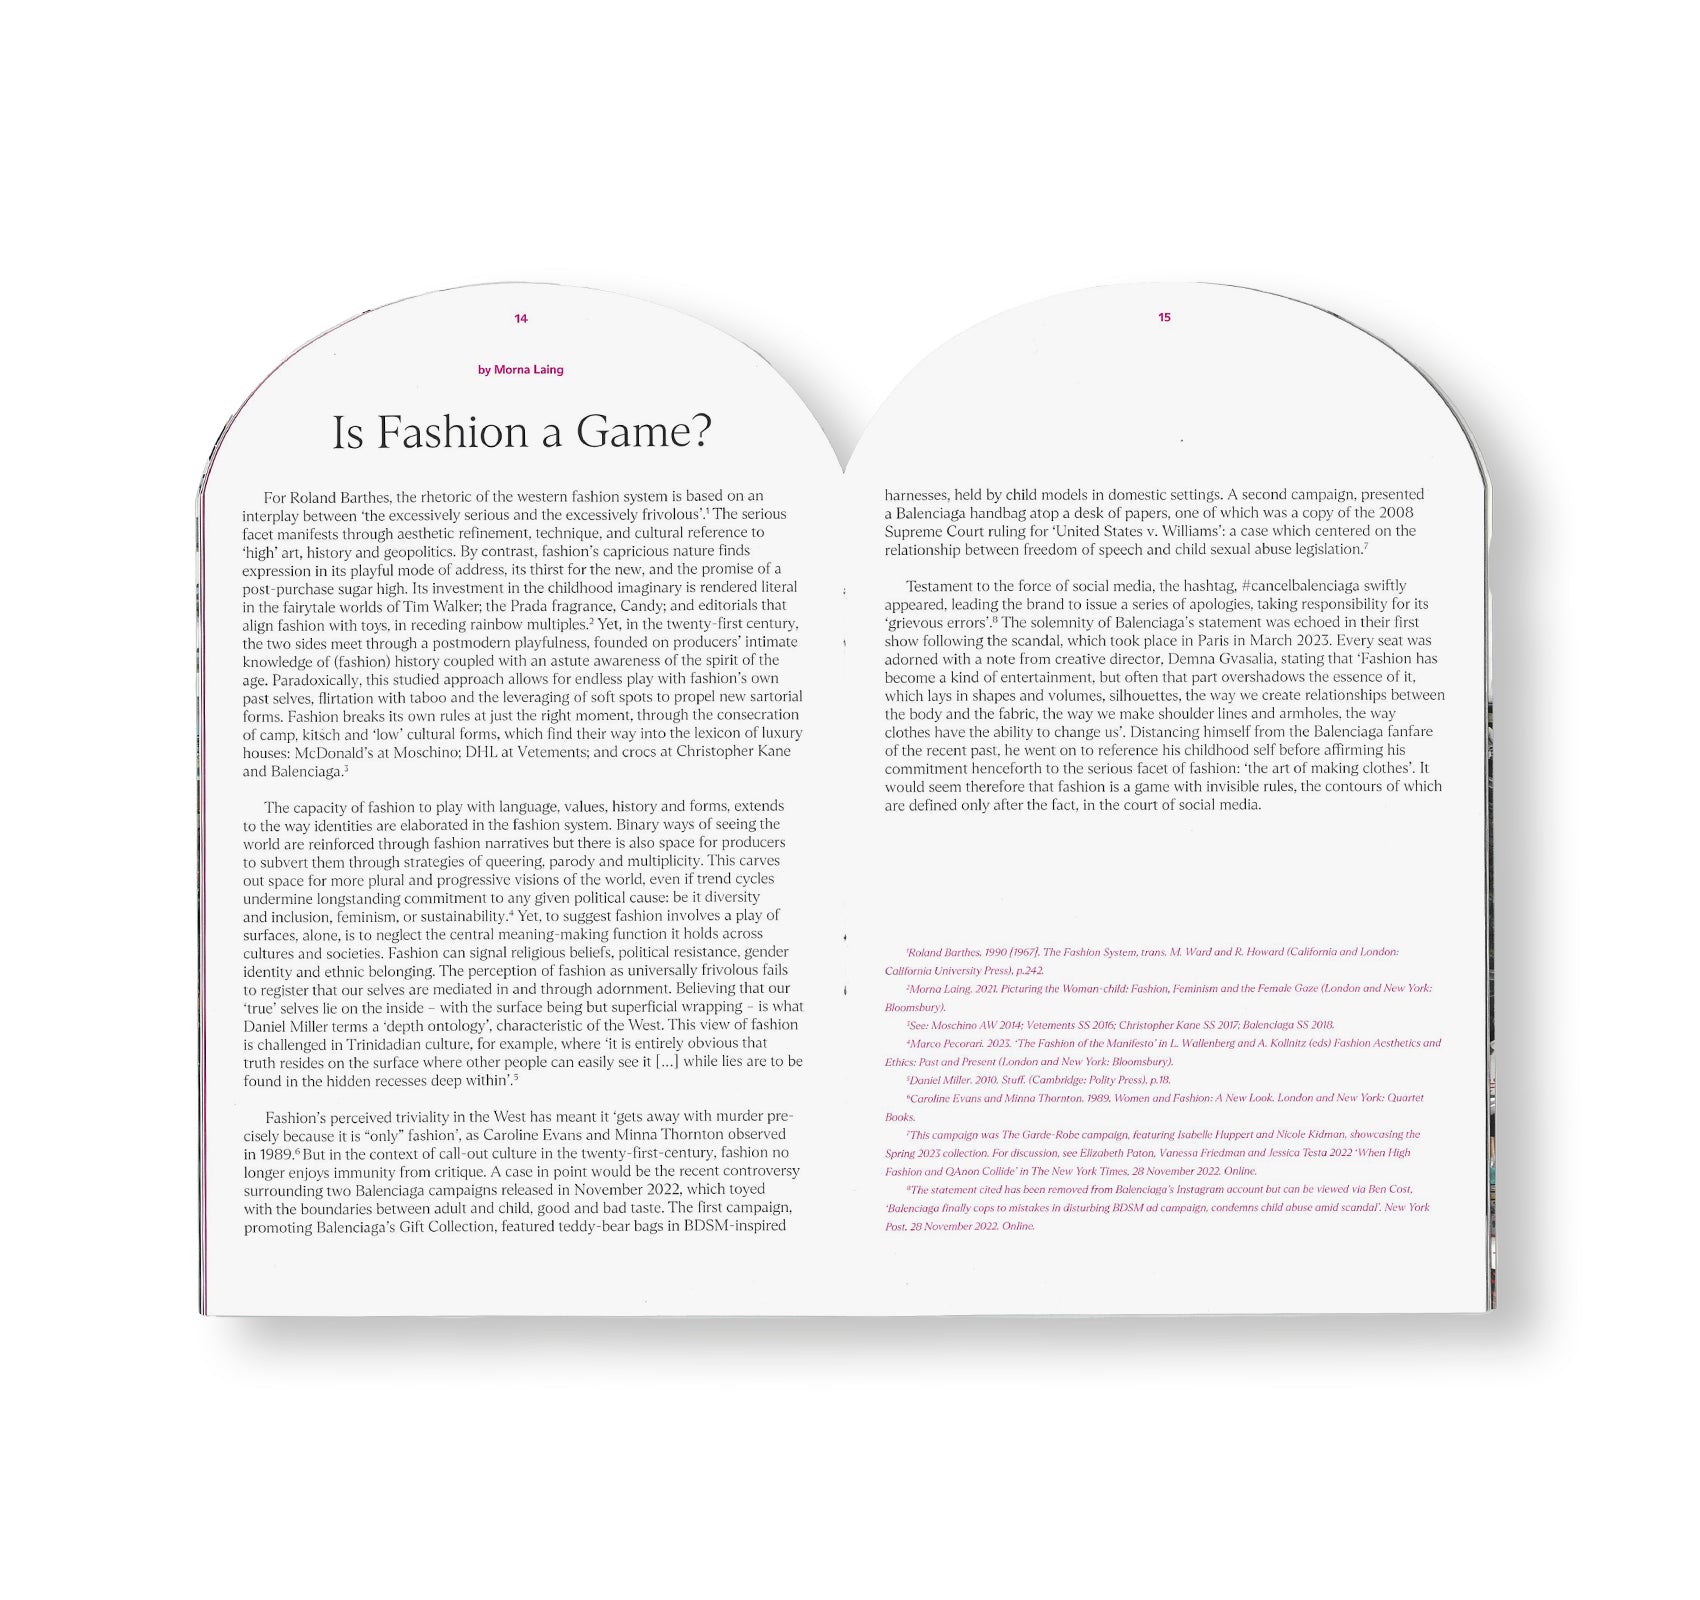 INTERNATIONAL LIBRARY OF FASHION RESEARCH N°5 - GAME OVER: FASHION & PLAY